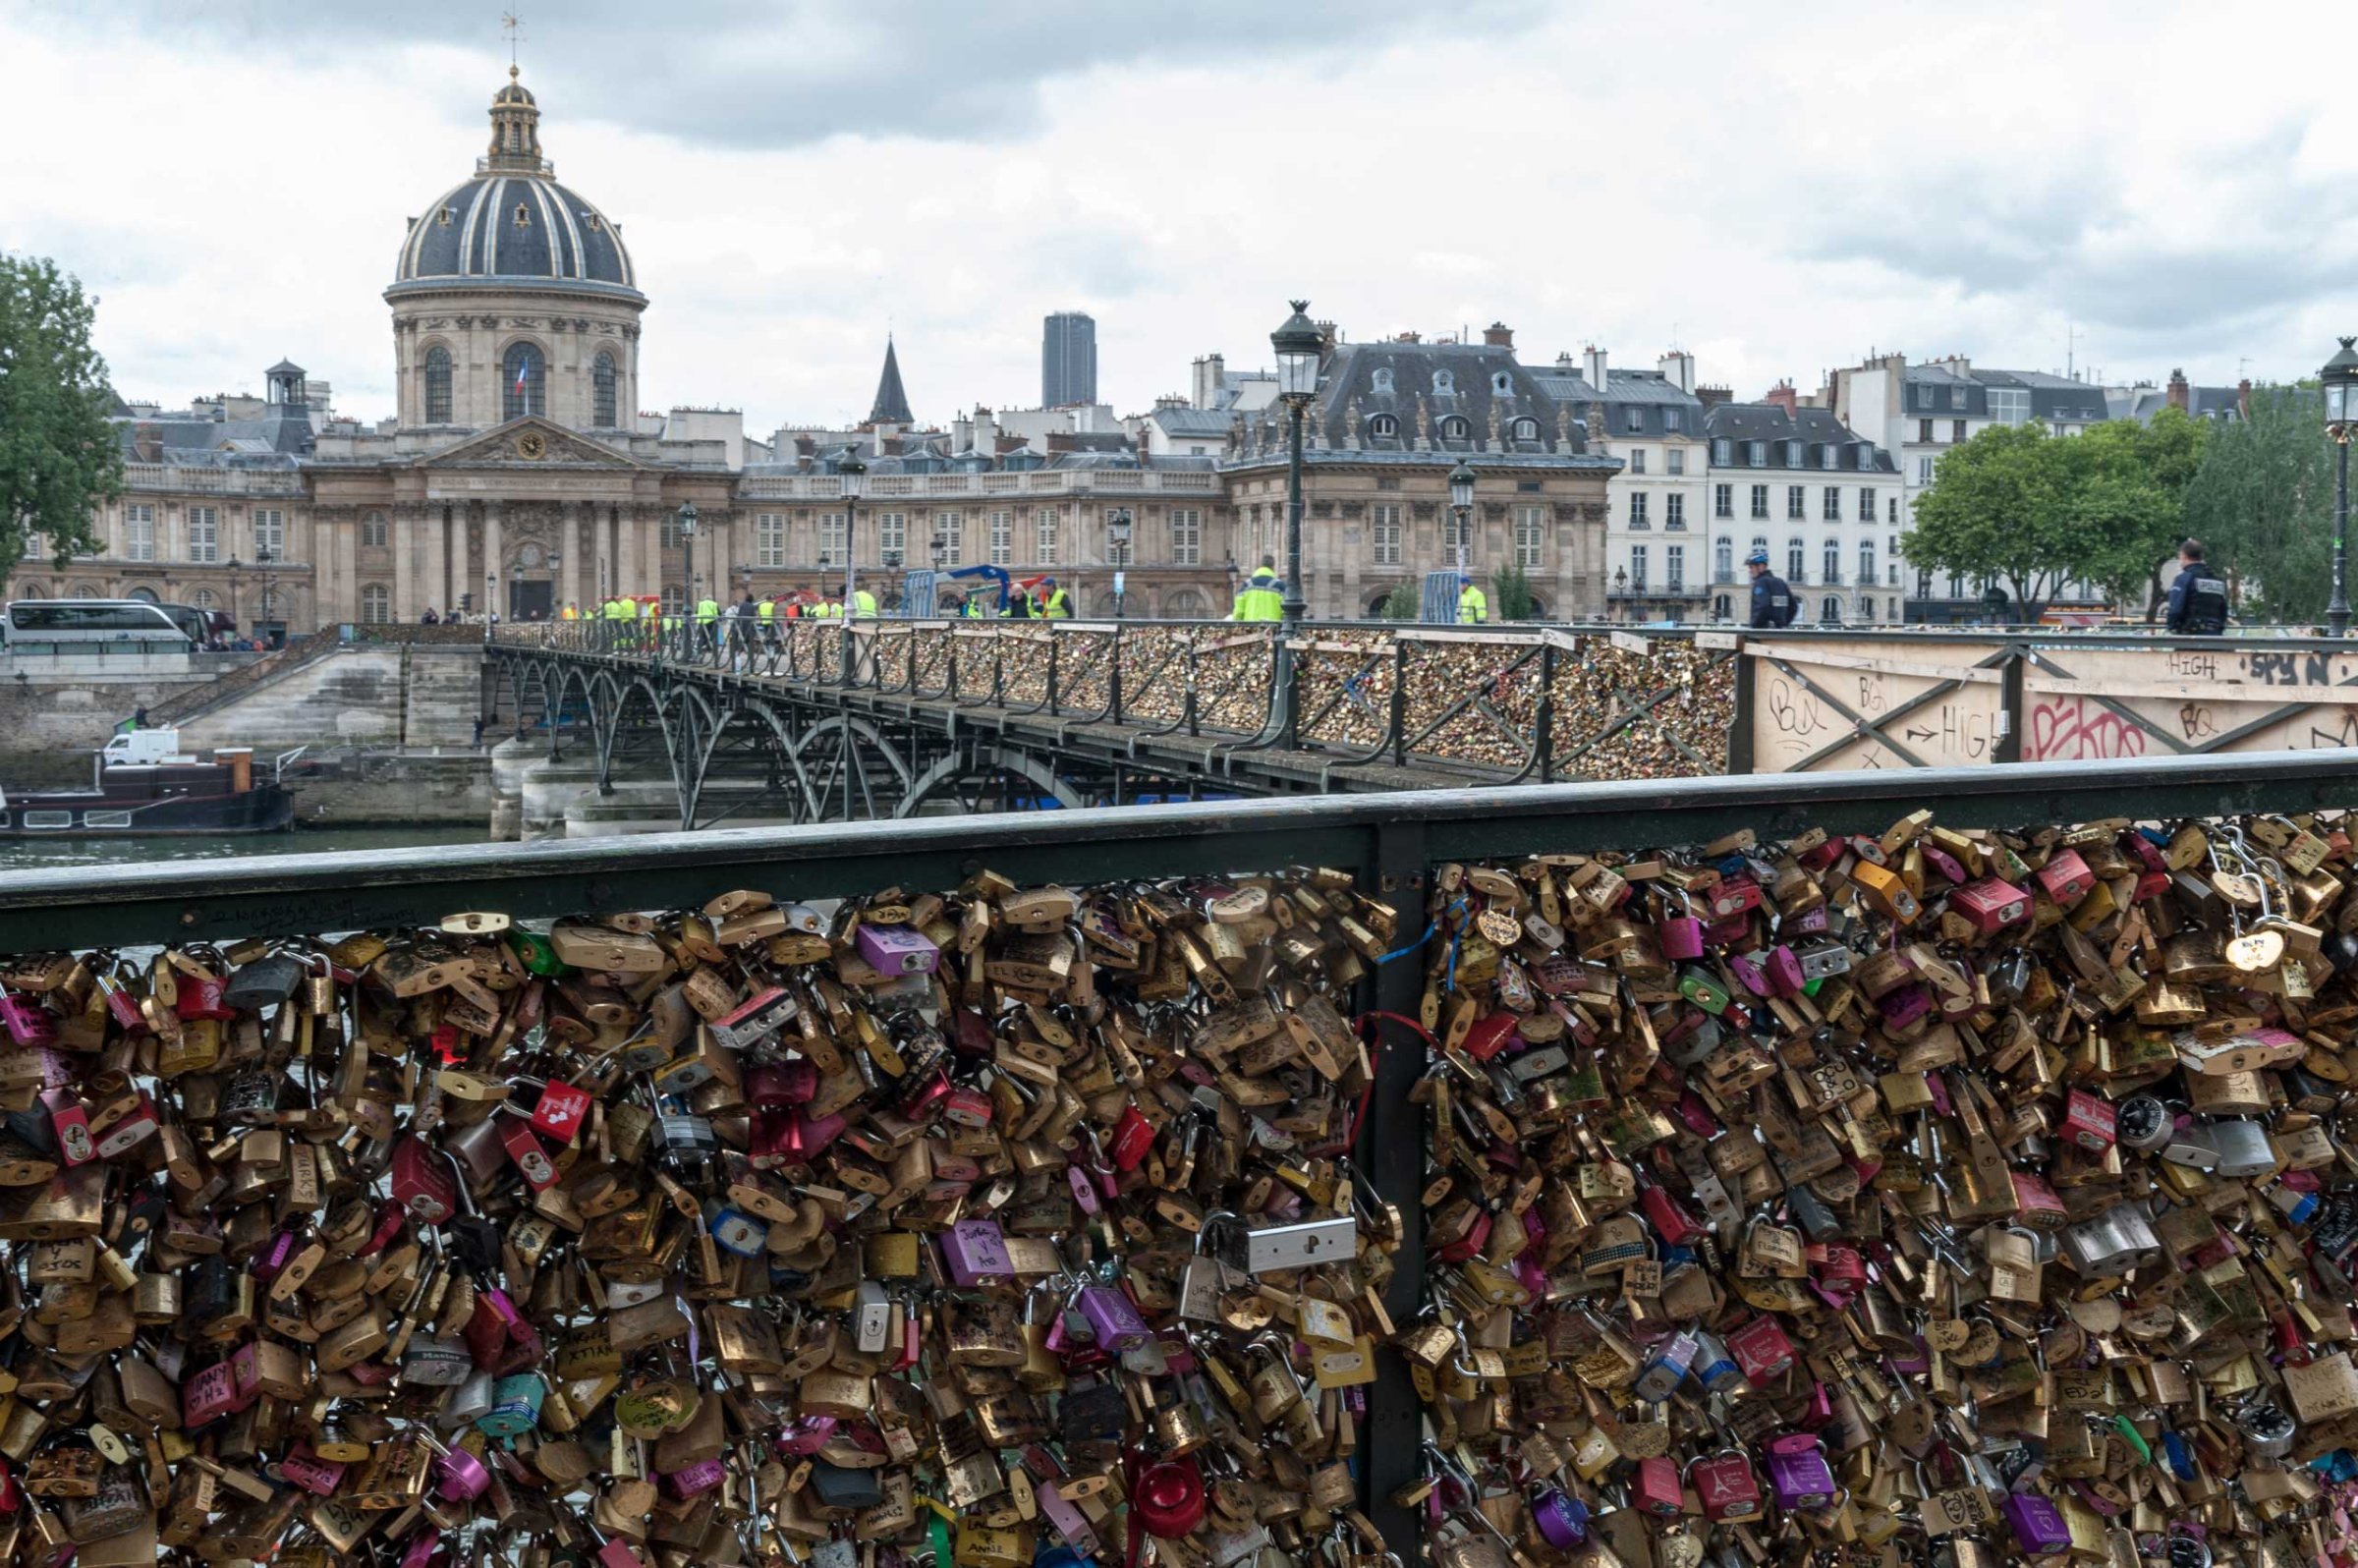 01 Jun 2015, Paris, France --- Paris, France. 1st June 2015 -- While workers make good progress in removing love locks attached to the Pont des Arts, there are many more to go. -- The city of Paris has started removing millions of so-called love locks from its historic bridges due to safety and aesthetic concerns. At Pont des Arts, workers cut away panels covered in locks, each one estimated to weigh on average about 400kg. --- Image by © Tim Anger/Demotix/Corbis